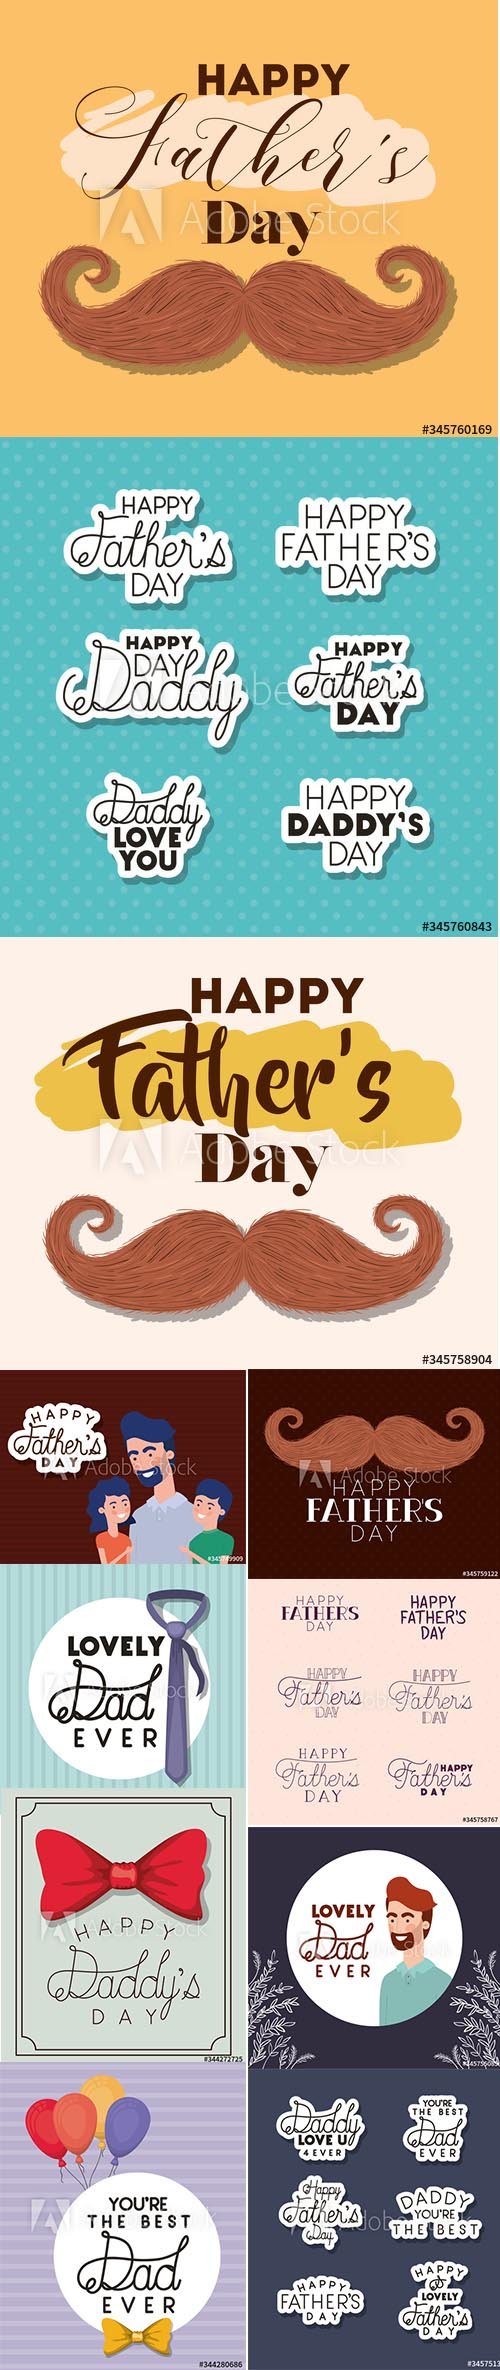 Happy Father Day Illustrations Set Vol 2